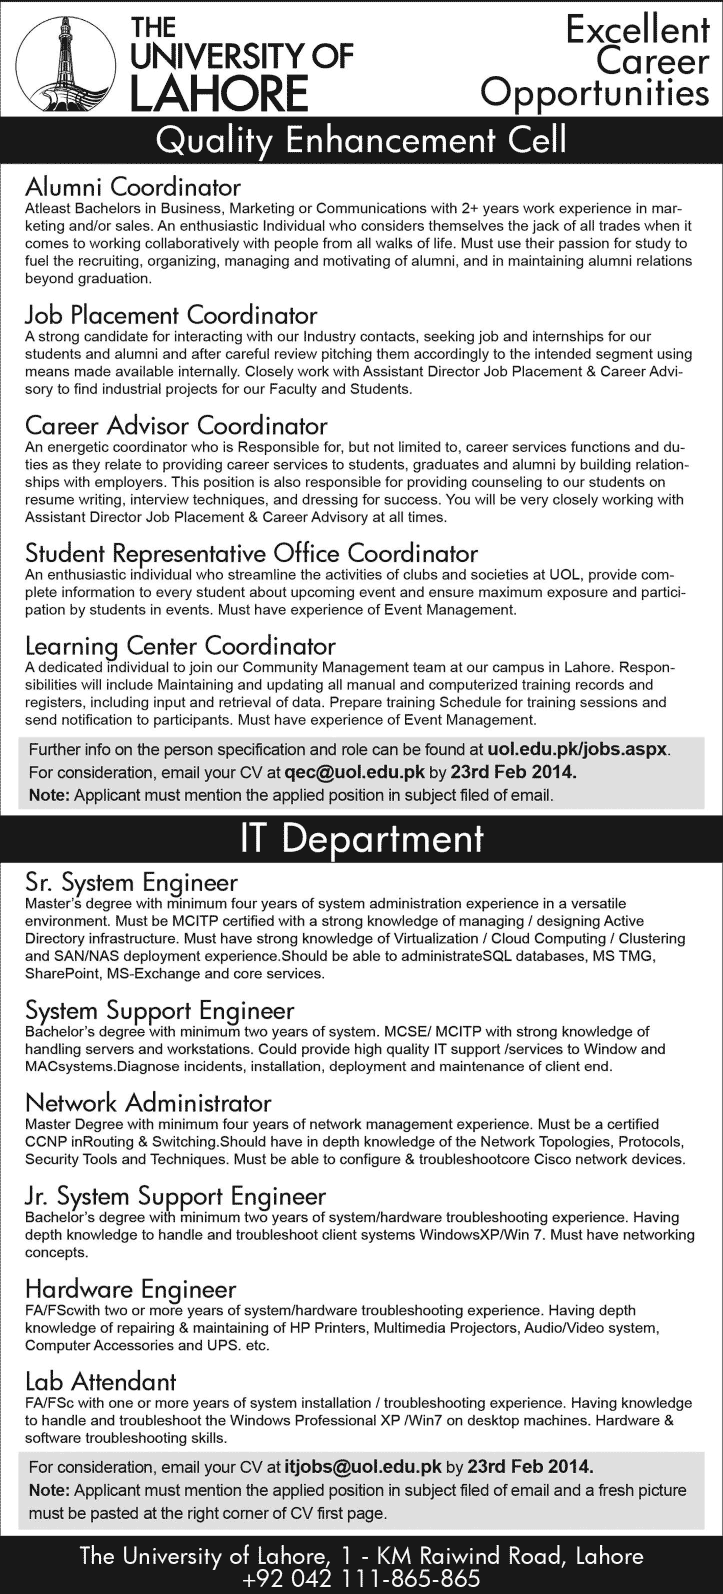 University of Lahore Jobs 2014 February for Quality Enhancement Cell & IT Department